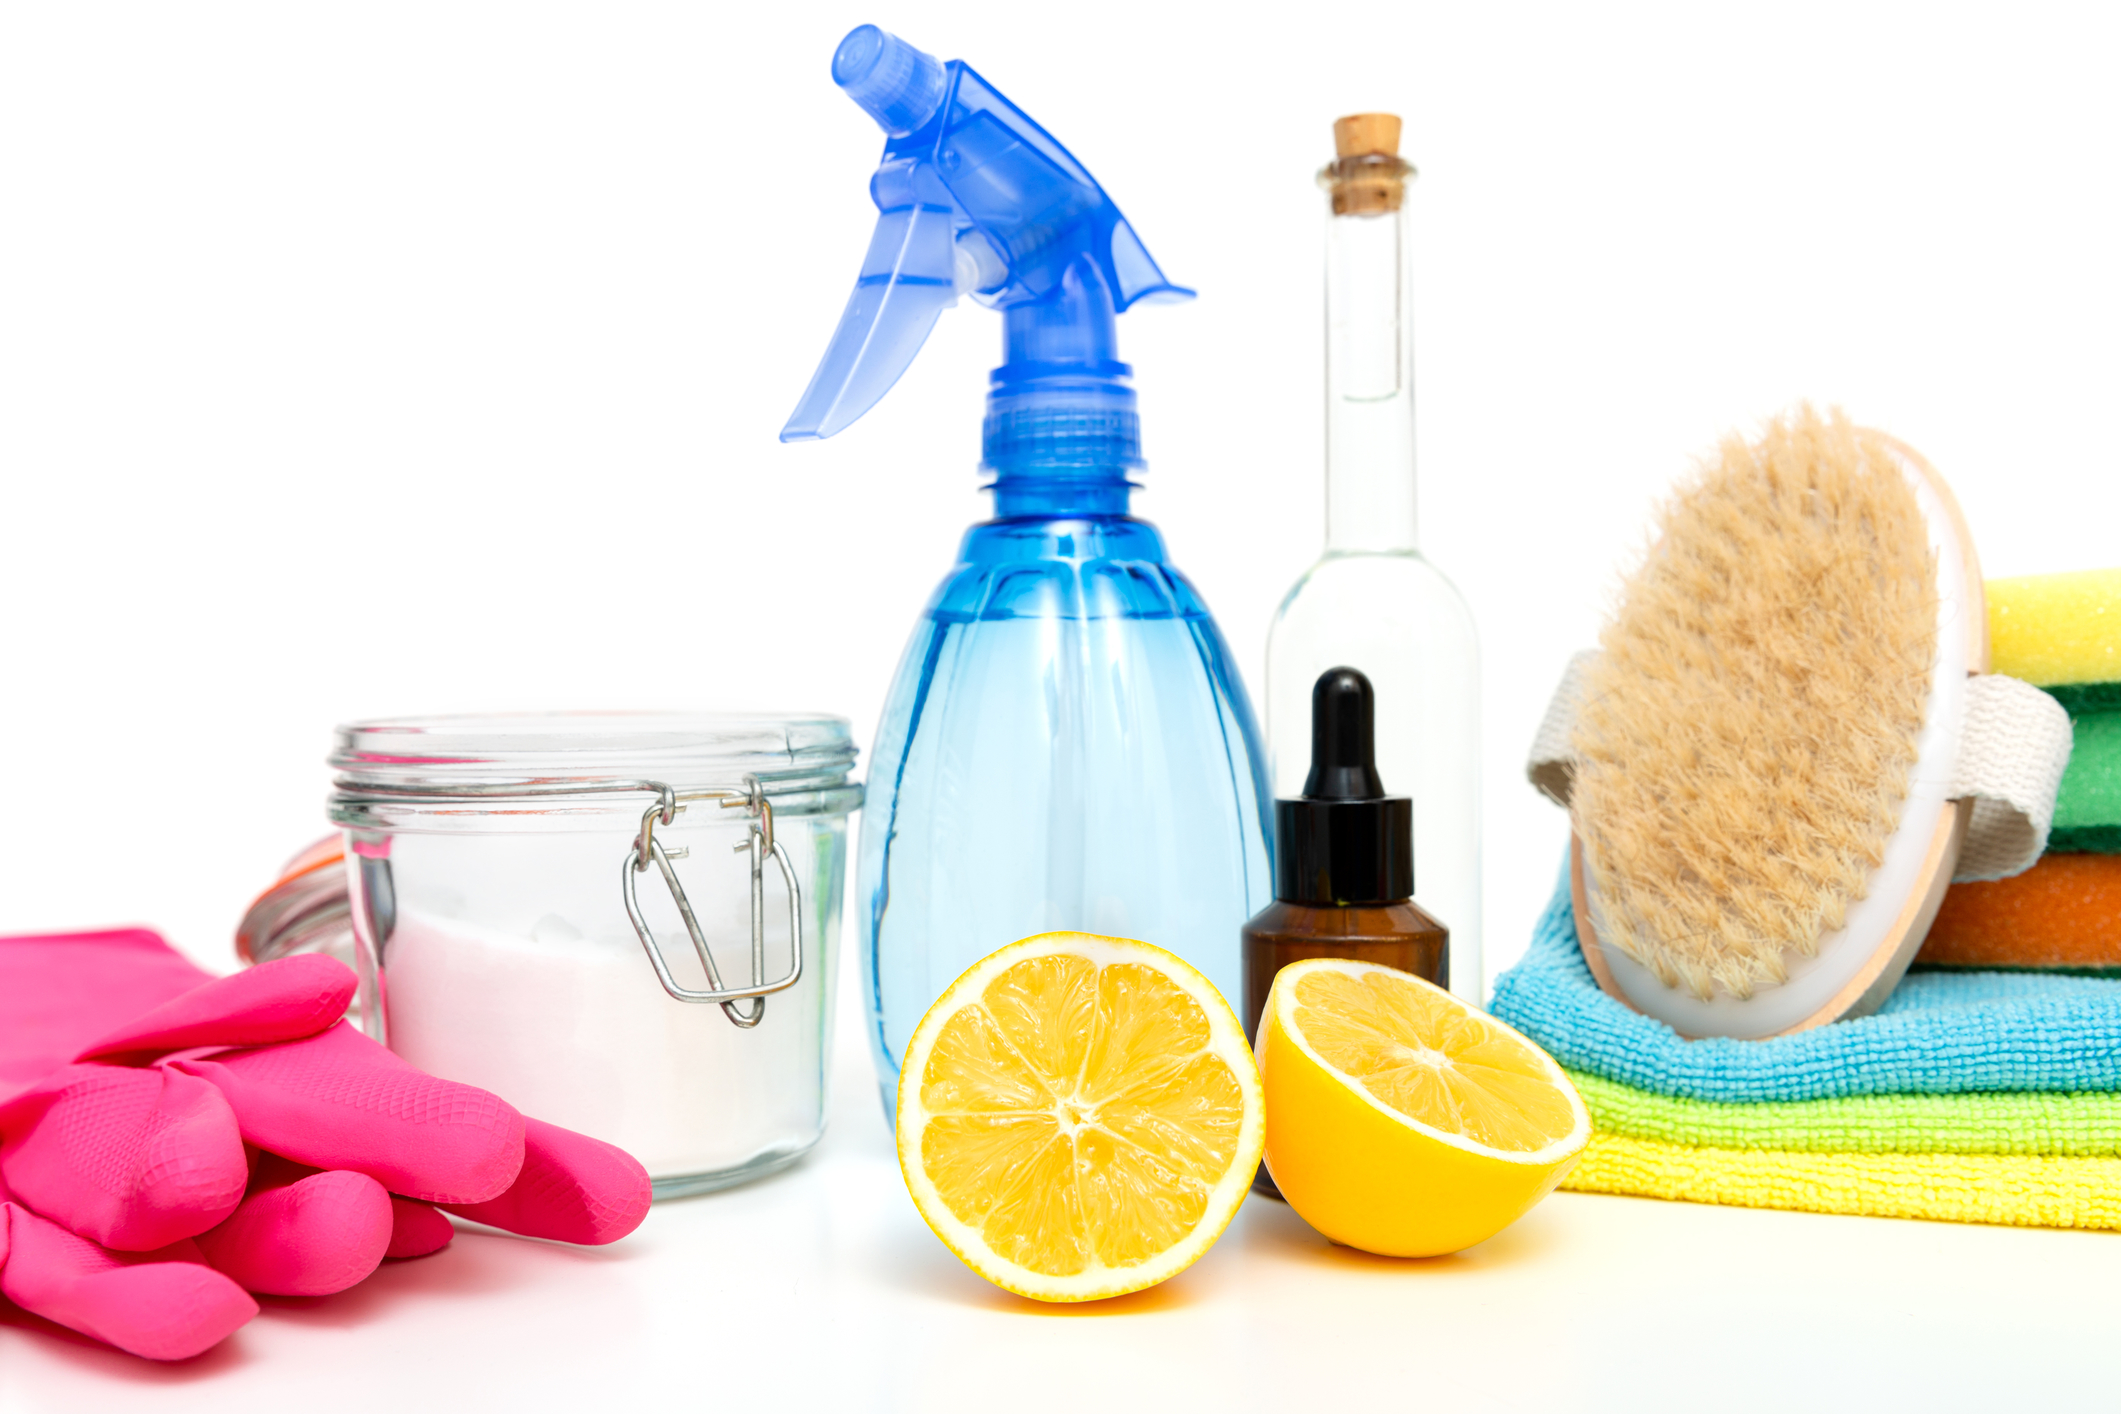 https://www.petalsweetcleaning.com/staging/wp-content/uploads/2023/04/lemons-and-cleaning-stuff.jpg